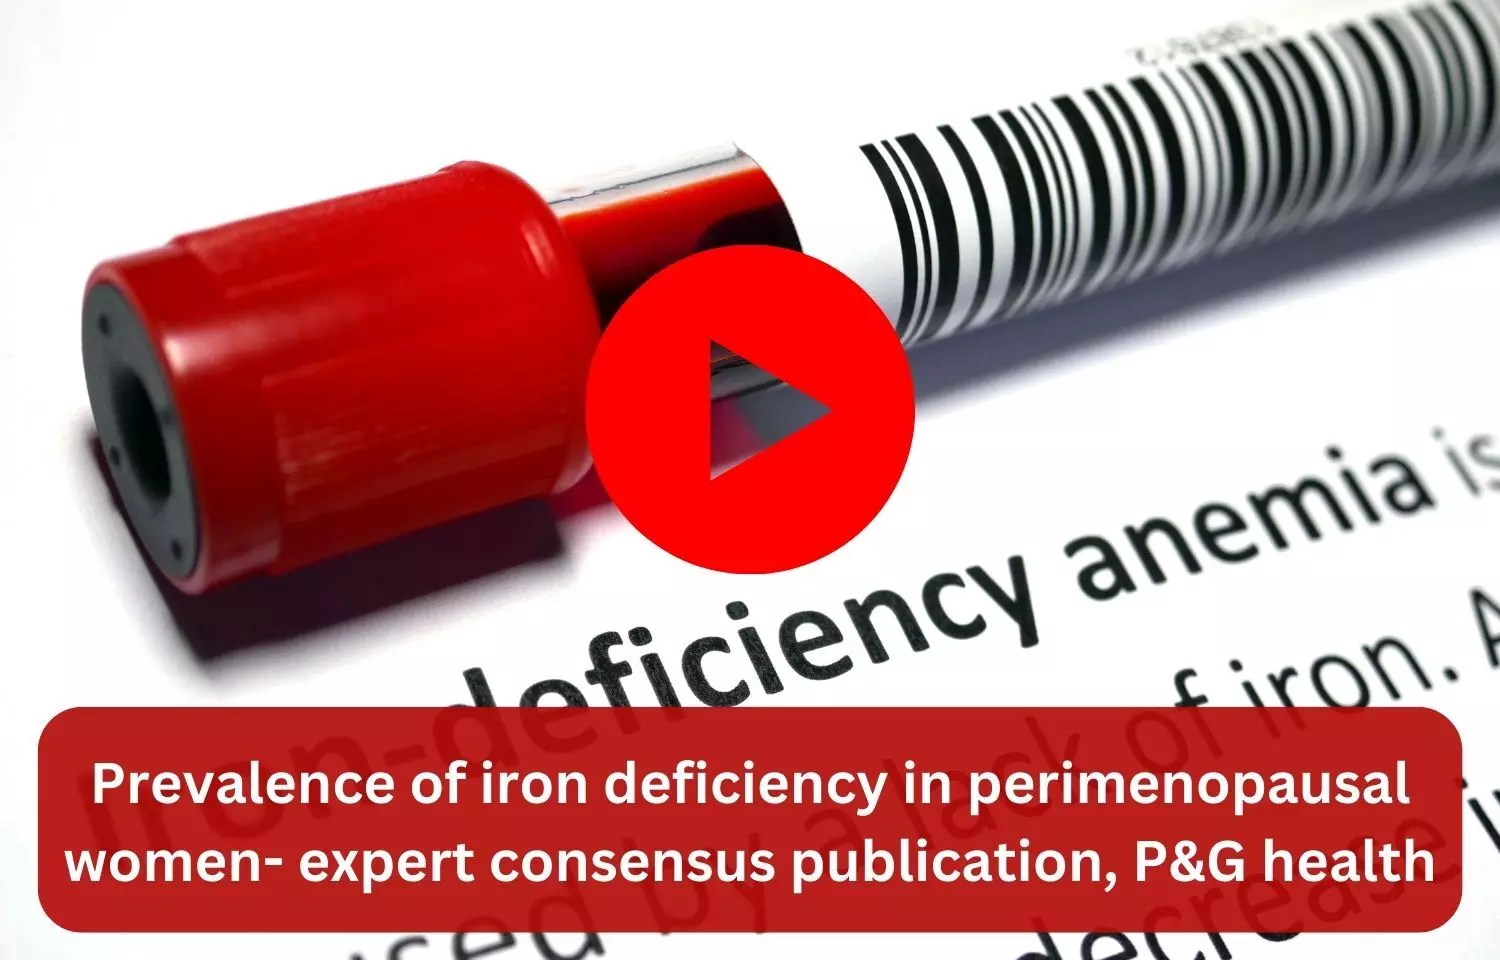 Prevalence of iron deficiency in perimenopausal women-Expert consensus publication, P&G health